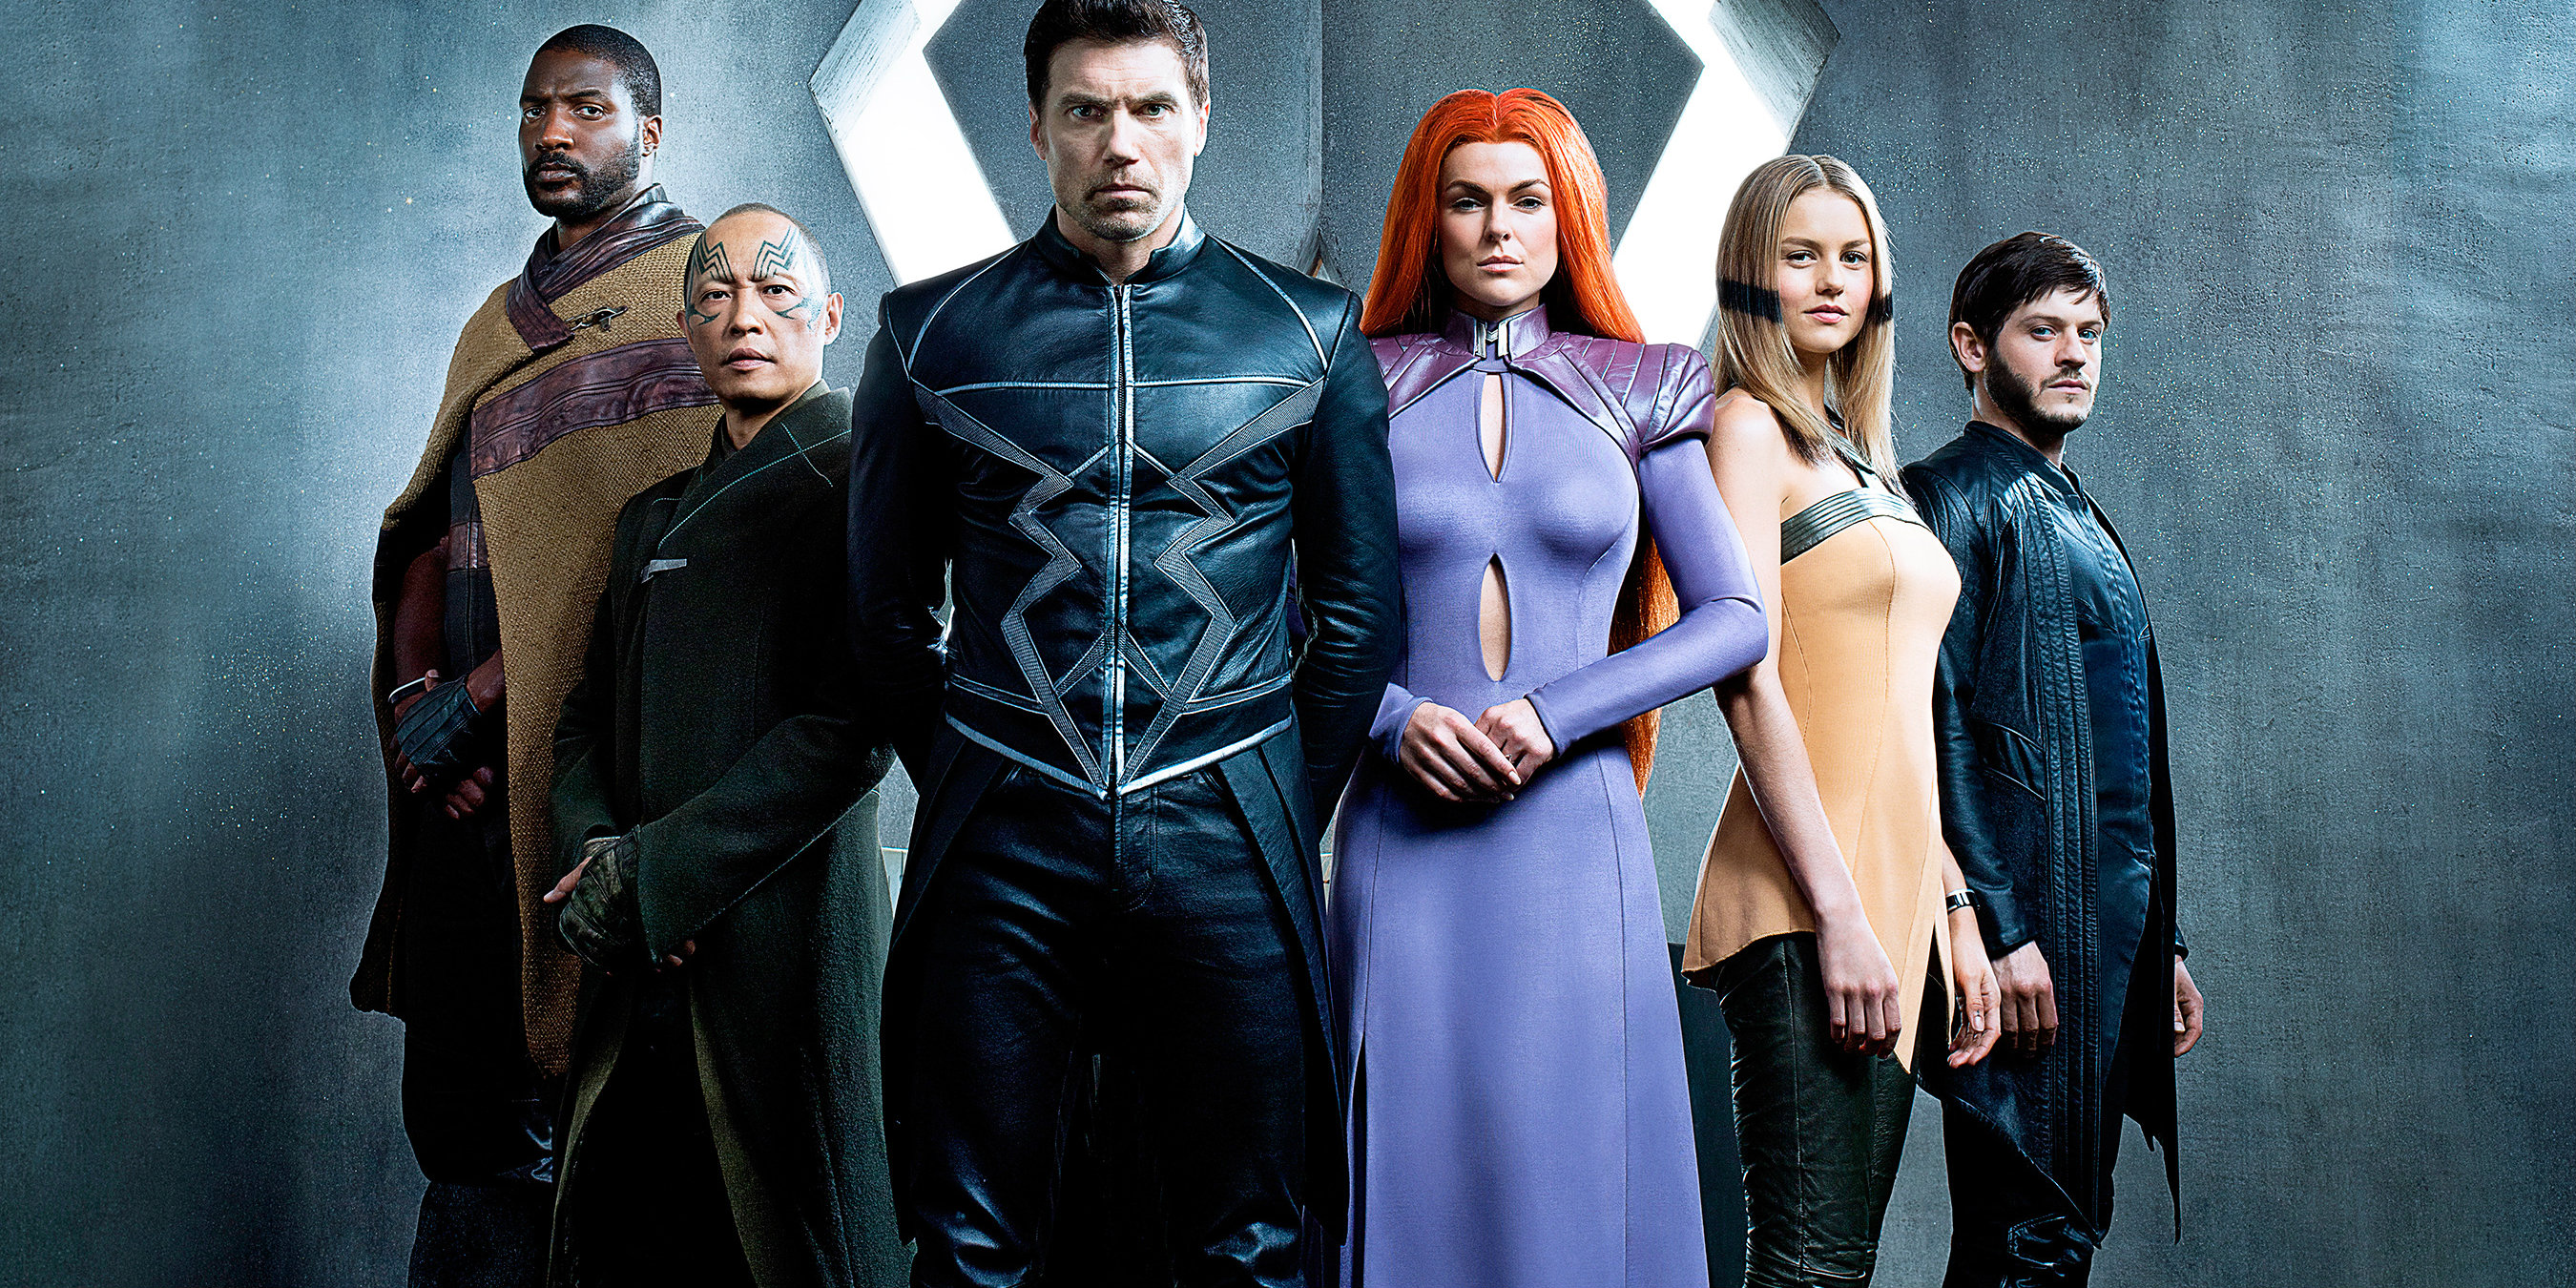 Its Time For The World To Meet The Inhumans – SDCC Official Trailer